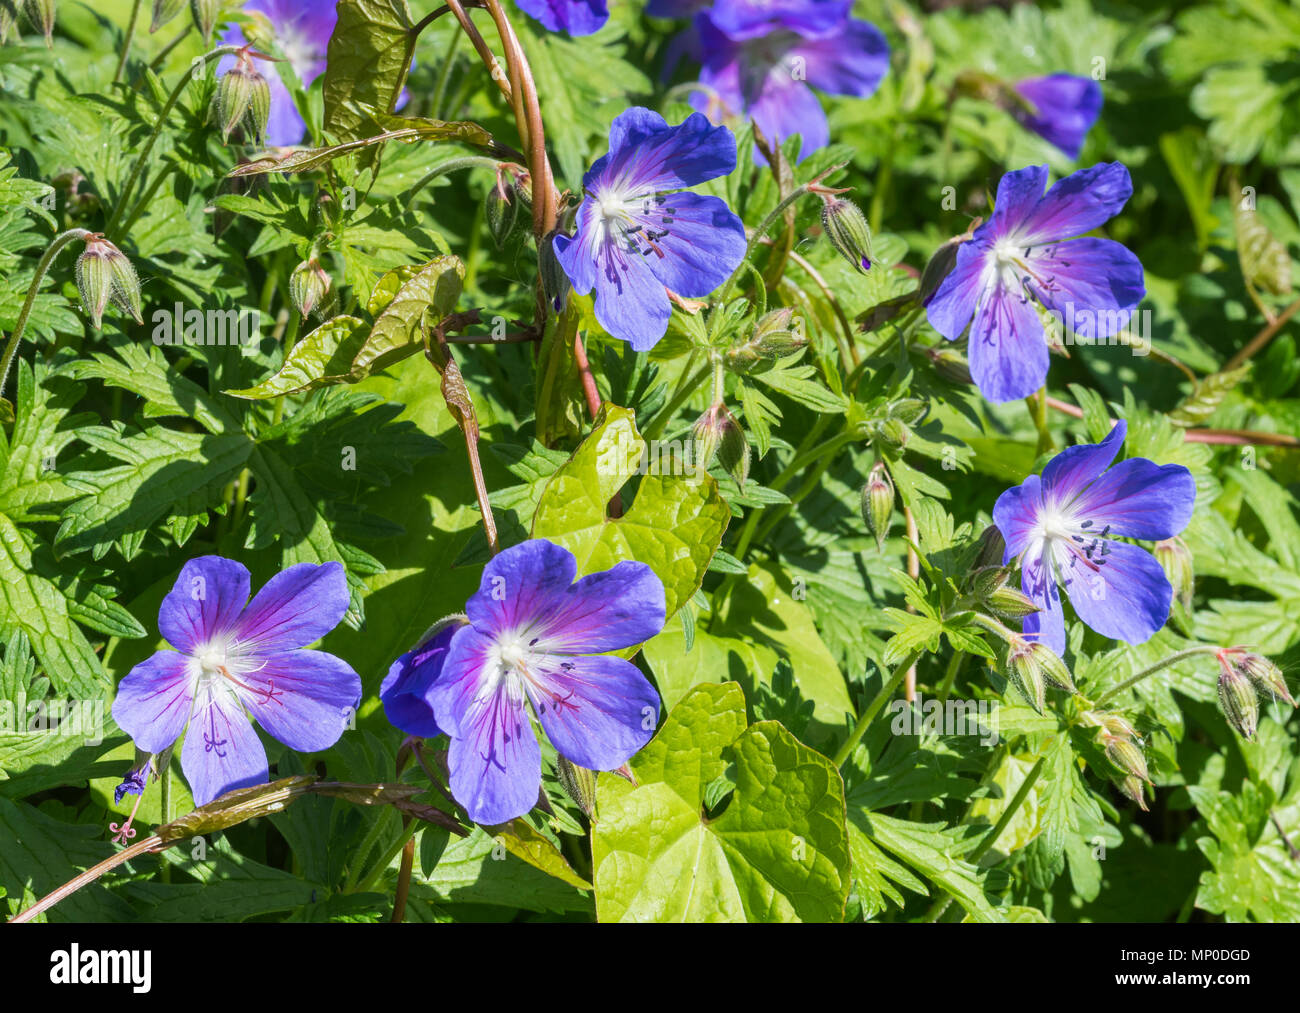 Purple Geranium, probably Meadow Cranesbill (Geranium pratense, Meadow cranesbill, Common cranesbill) flowers in late Spring in West Sussex, UK. Stock Photo